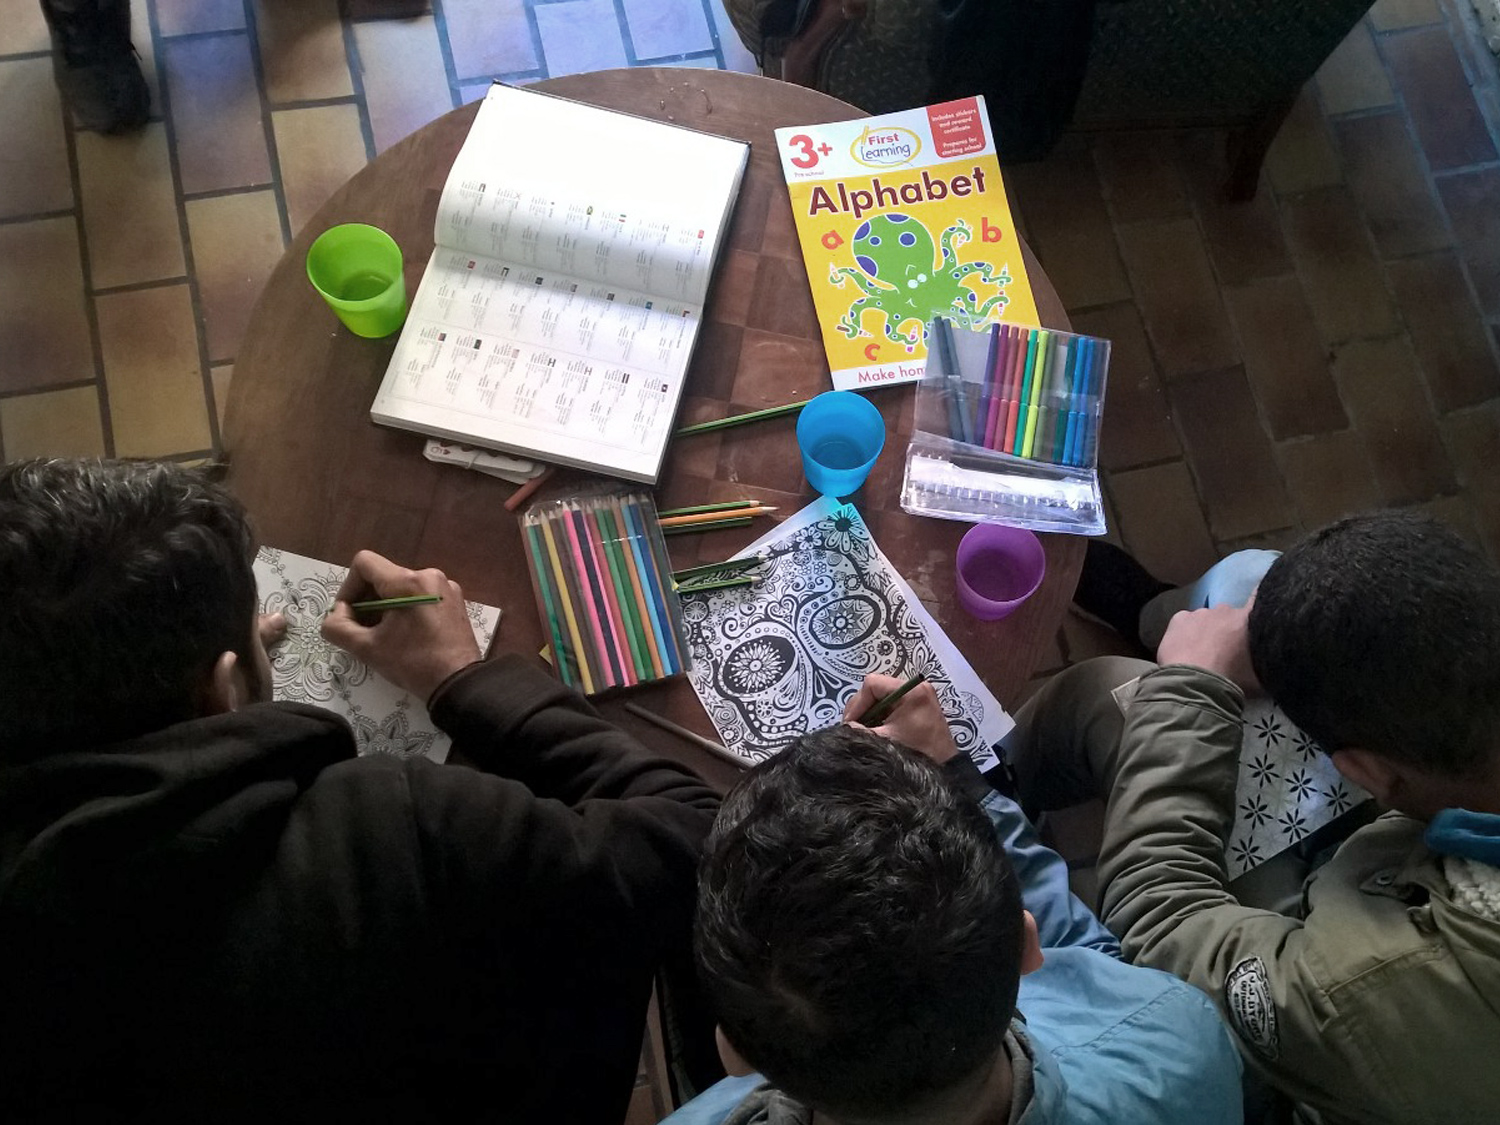 Children colouring in with alphabet textbook